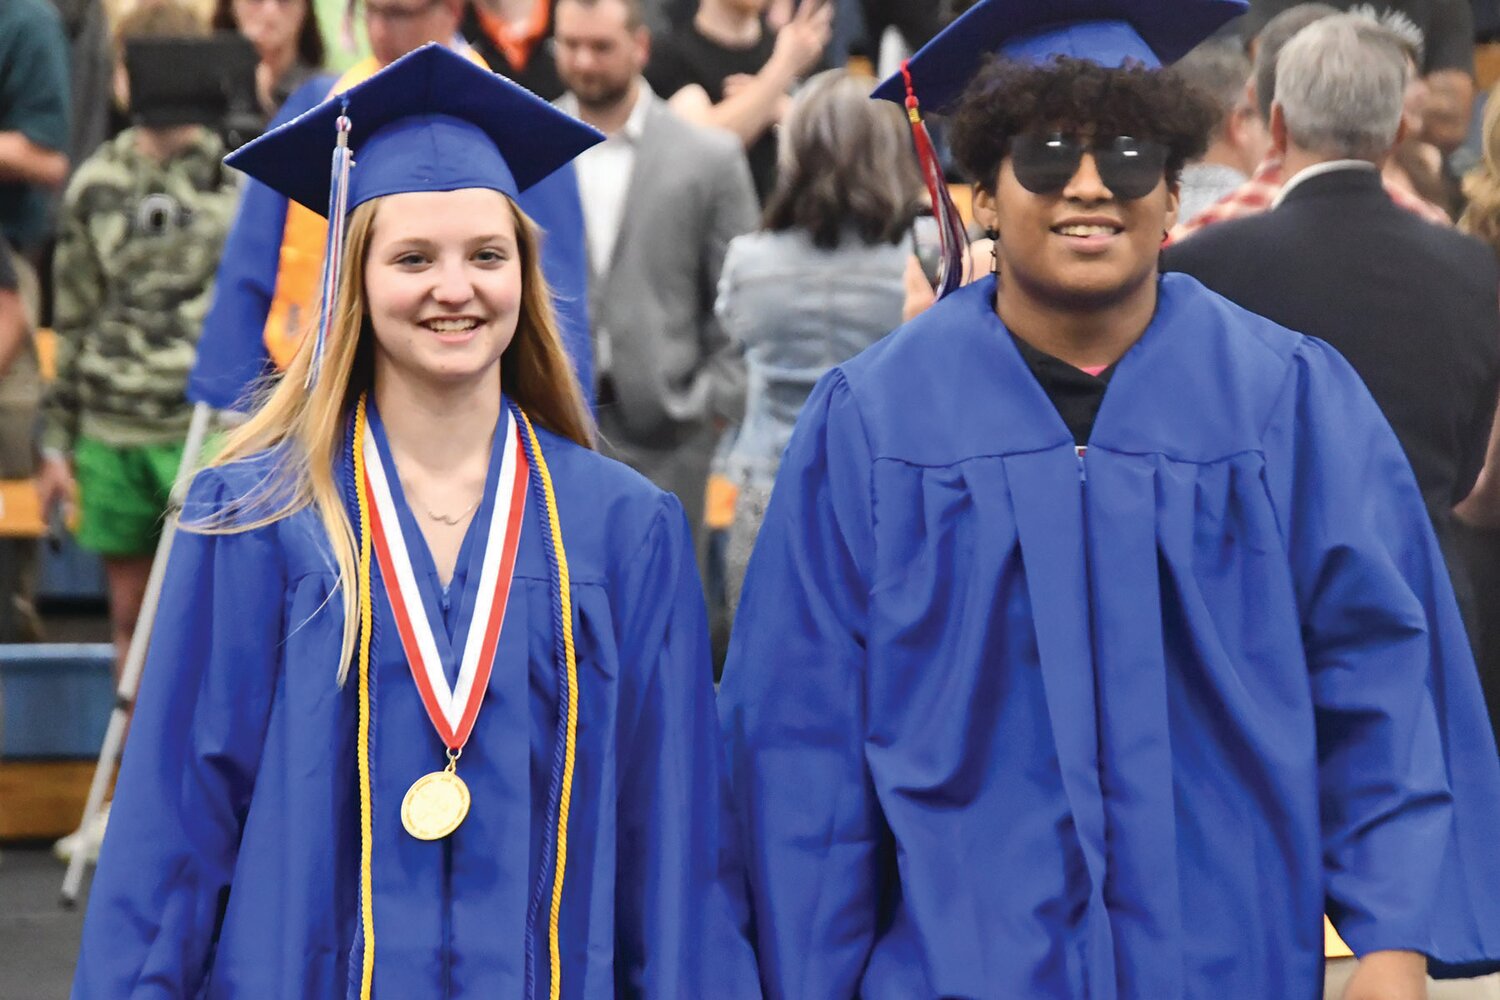 Moberly High School graduates Neveah Cleeton and Tyshaun Graves walk toward their seats during the processional.